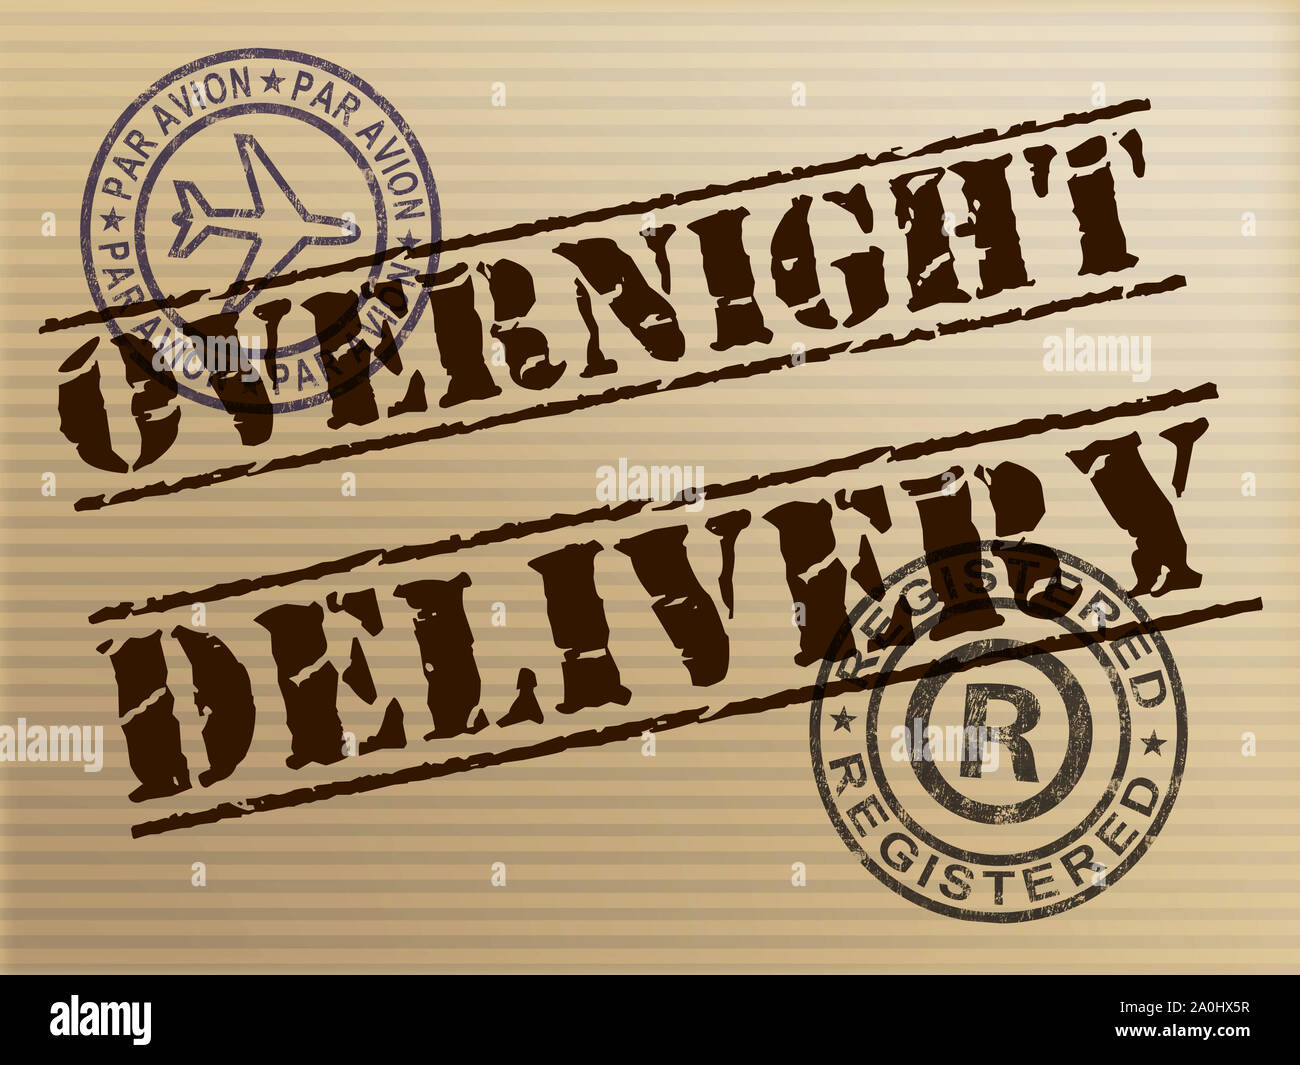 https://c8.alamy.com/comp/2A0HX5R/overnight-delivery-stamp-shows-express-service-24-hours-a-day-distribution-and-postal-shipment-quickly-3d-illustration-2A0HX5R.jpg